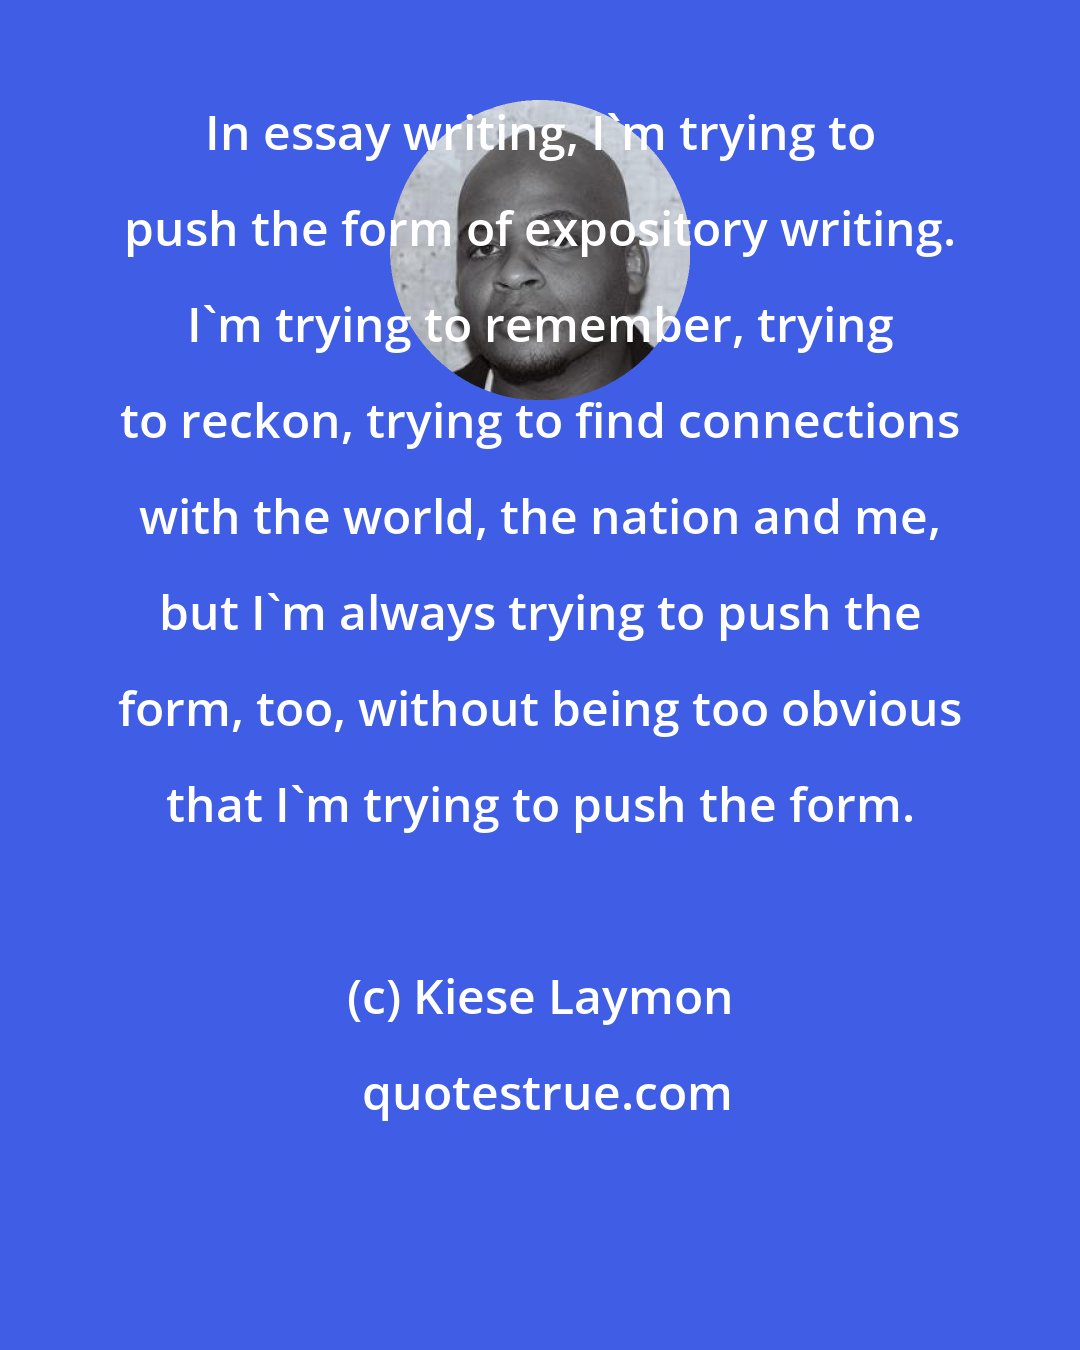 Kiese Laymon: In essay writing, I'm trying to push the form of expository writing. I'm trying to remember, trying to reckon, trying to find connections with the world, the nation and me, but I'm always trying to push the form, too, without being too obvious that I'm trying to push the form.